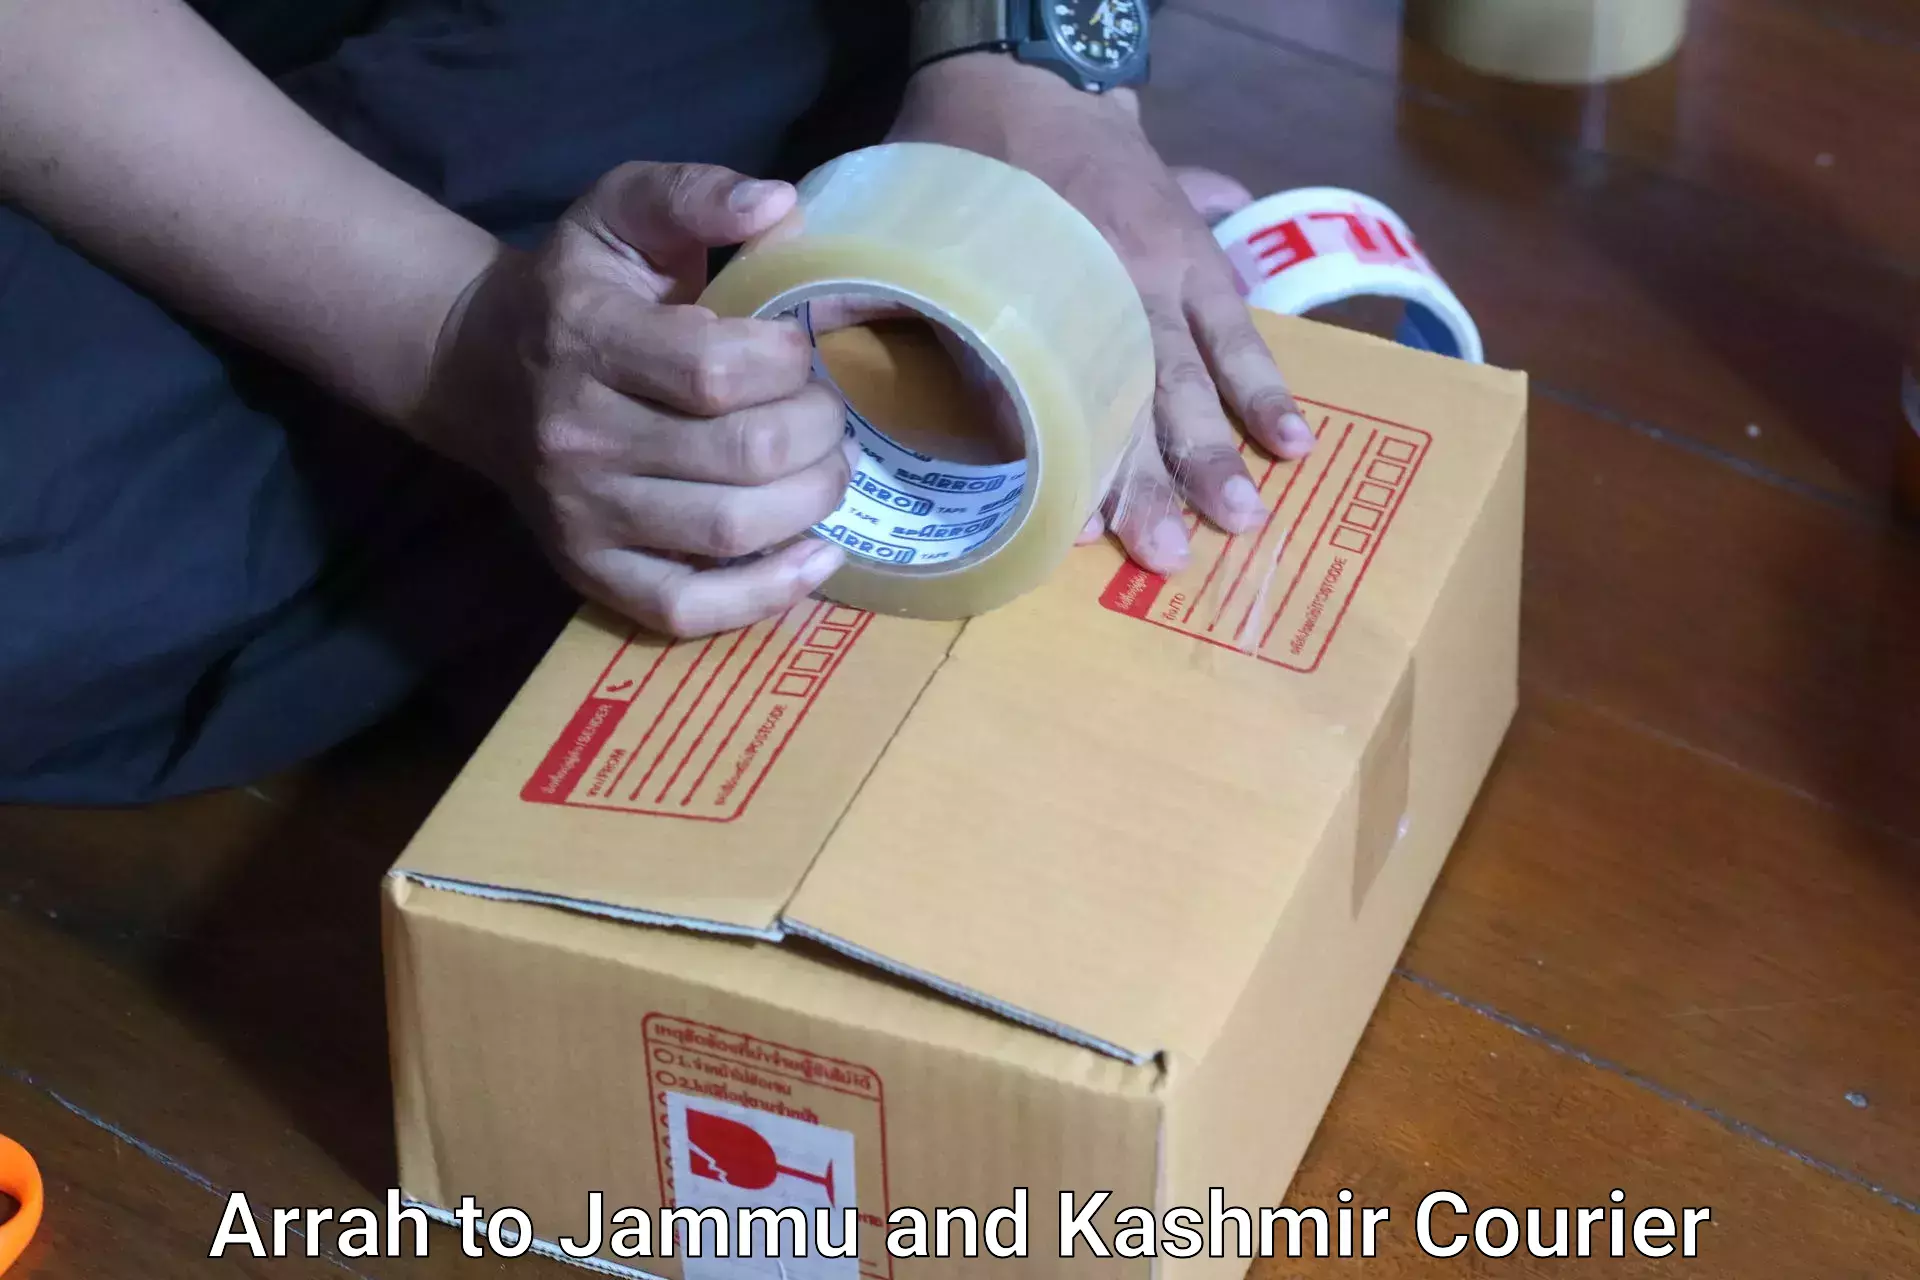 Luggage shipping planner Arrah to Jammu and Kashmir